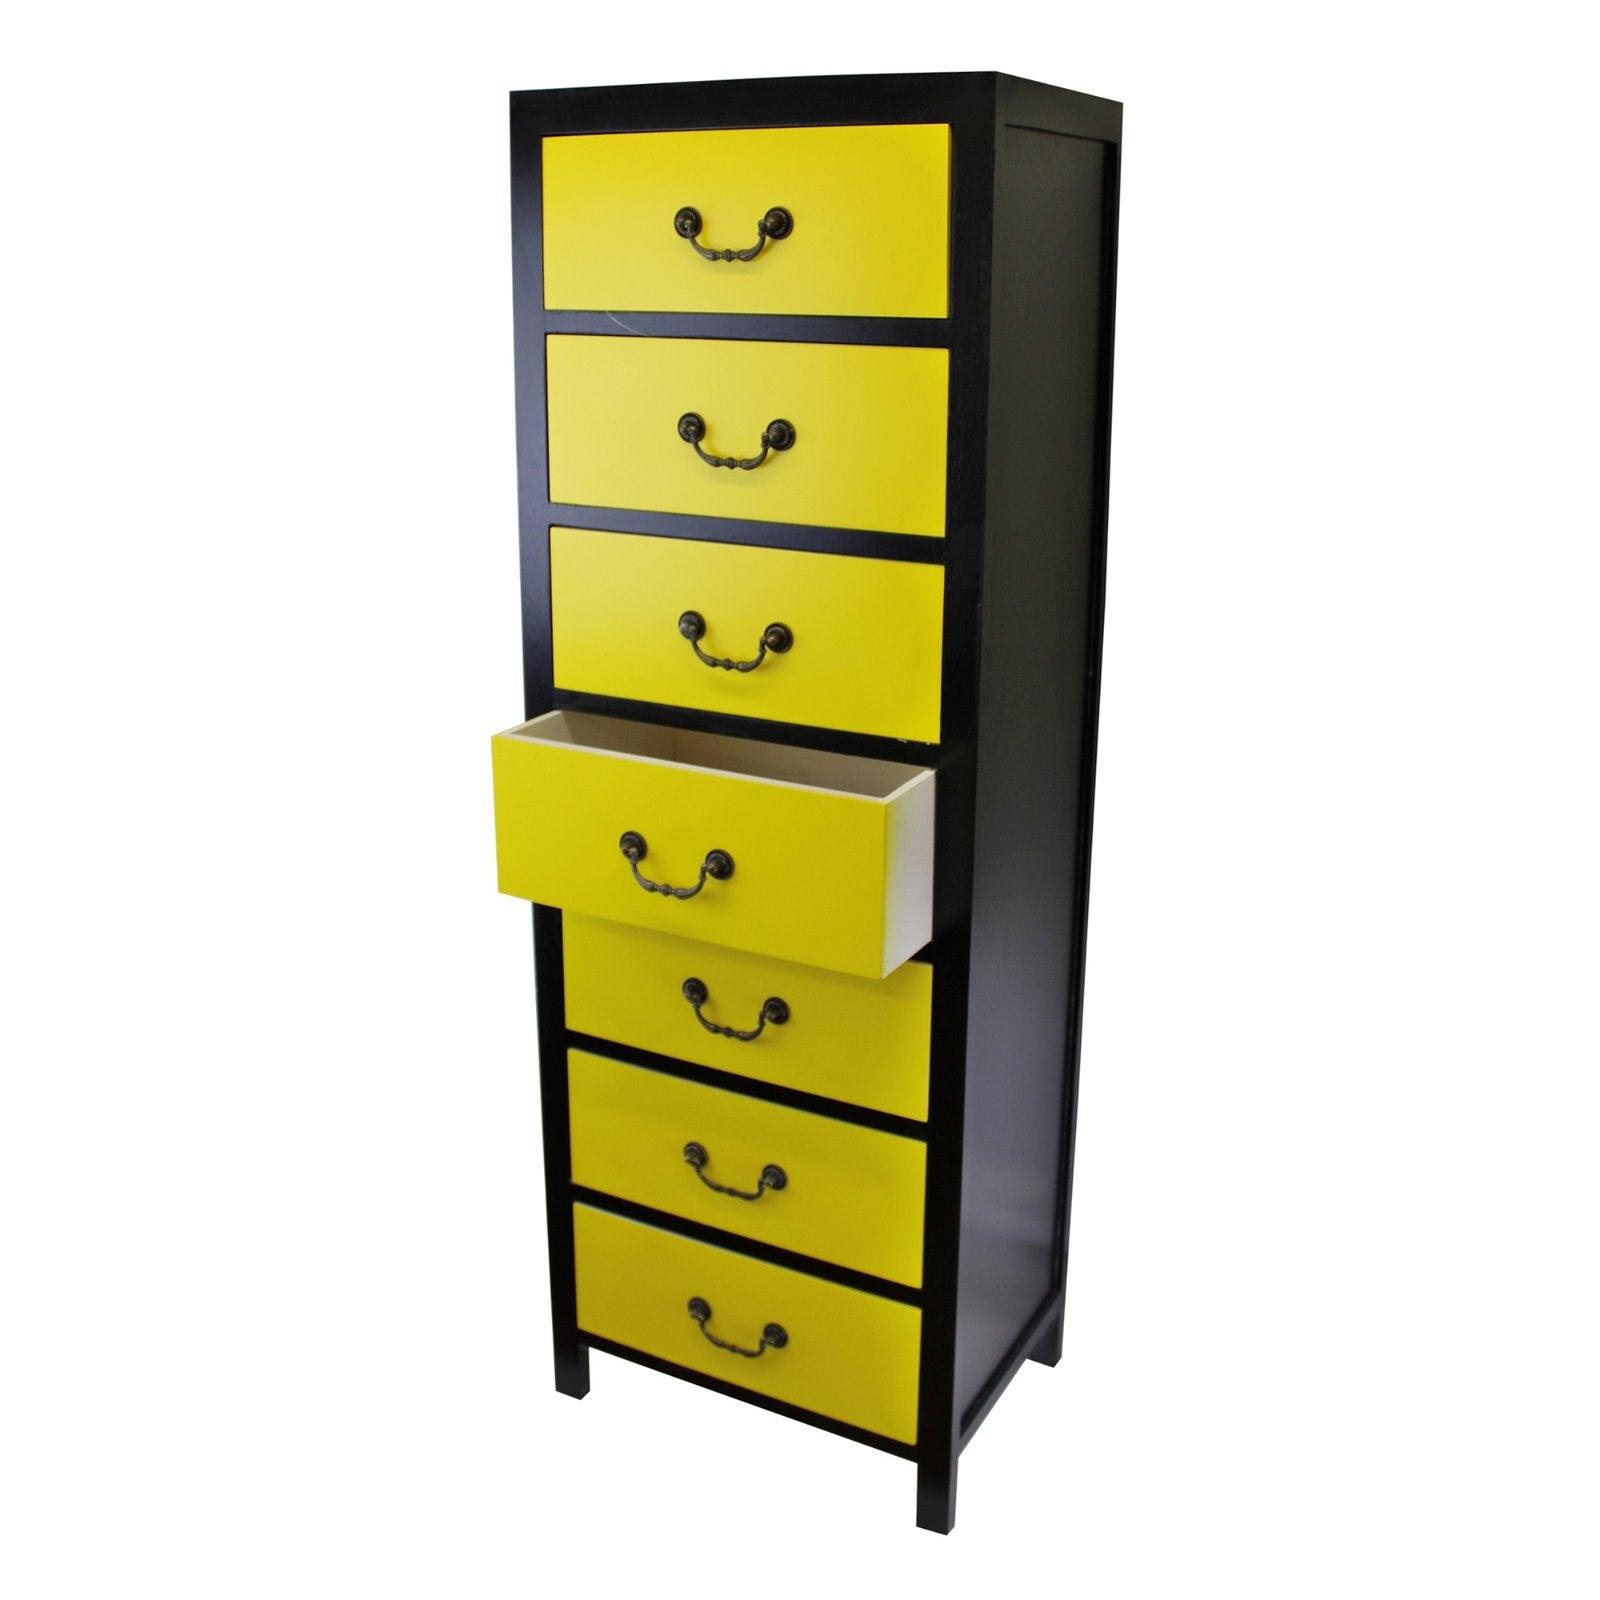 View Yellow Tall Cabinet with 7 Drawers 38 x 26 x 110cm information